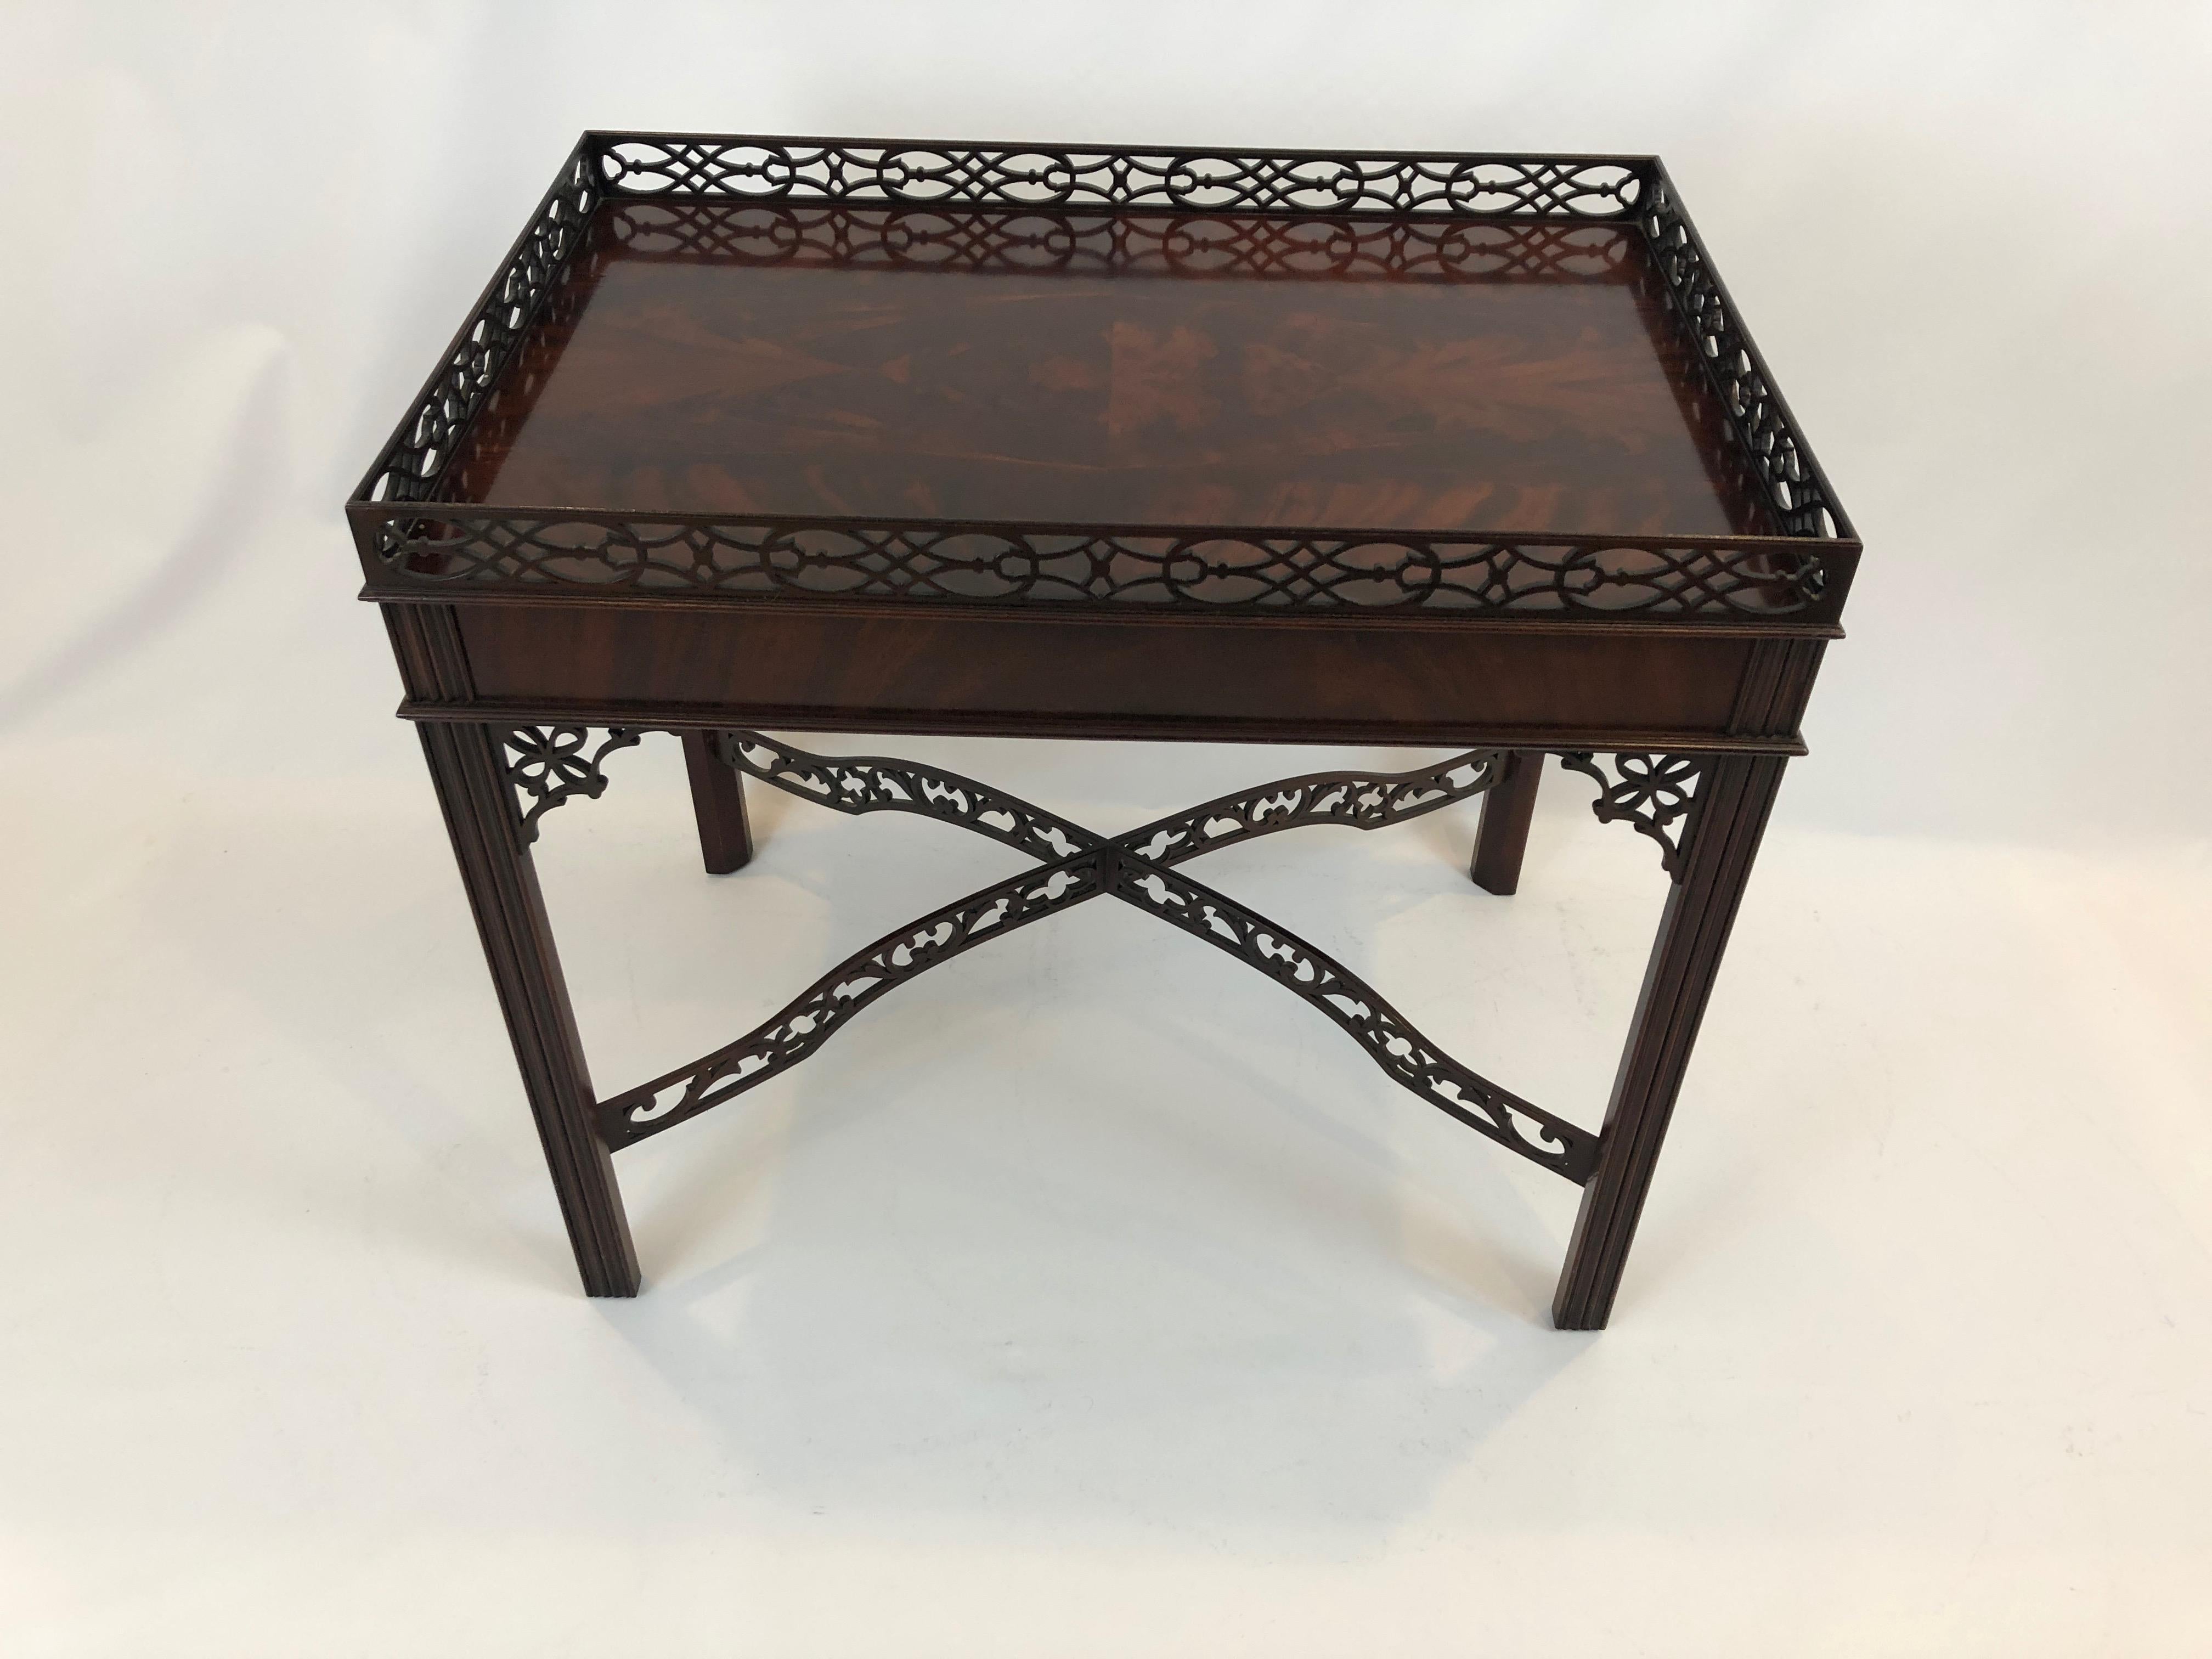 A beautiful Chippendale style rectangular side or tea table having two slides on each end and magnificently crafted wooden fretwork gallery, stretchers and decorative corners under the top. The flame mahogany of the surface is breathtaking. 
Baker